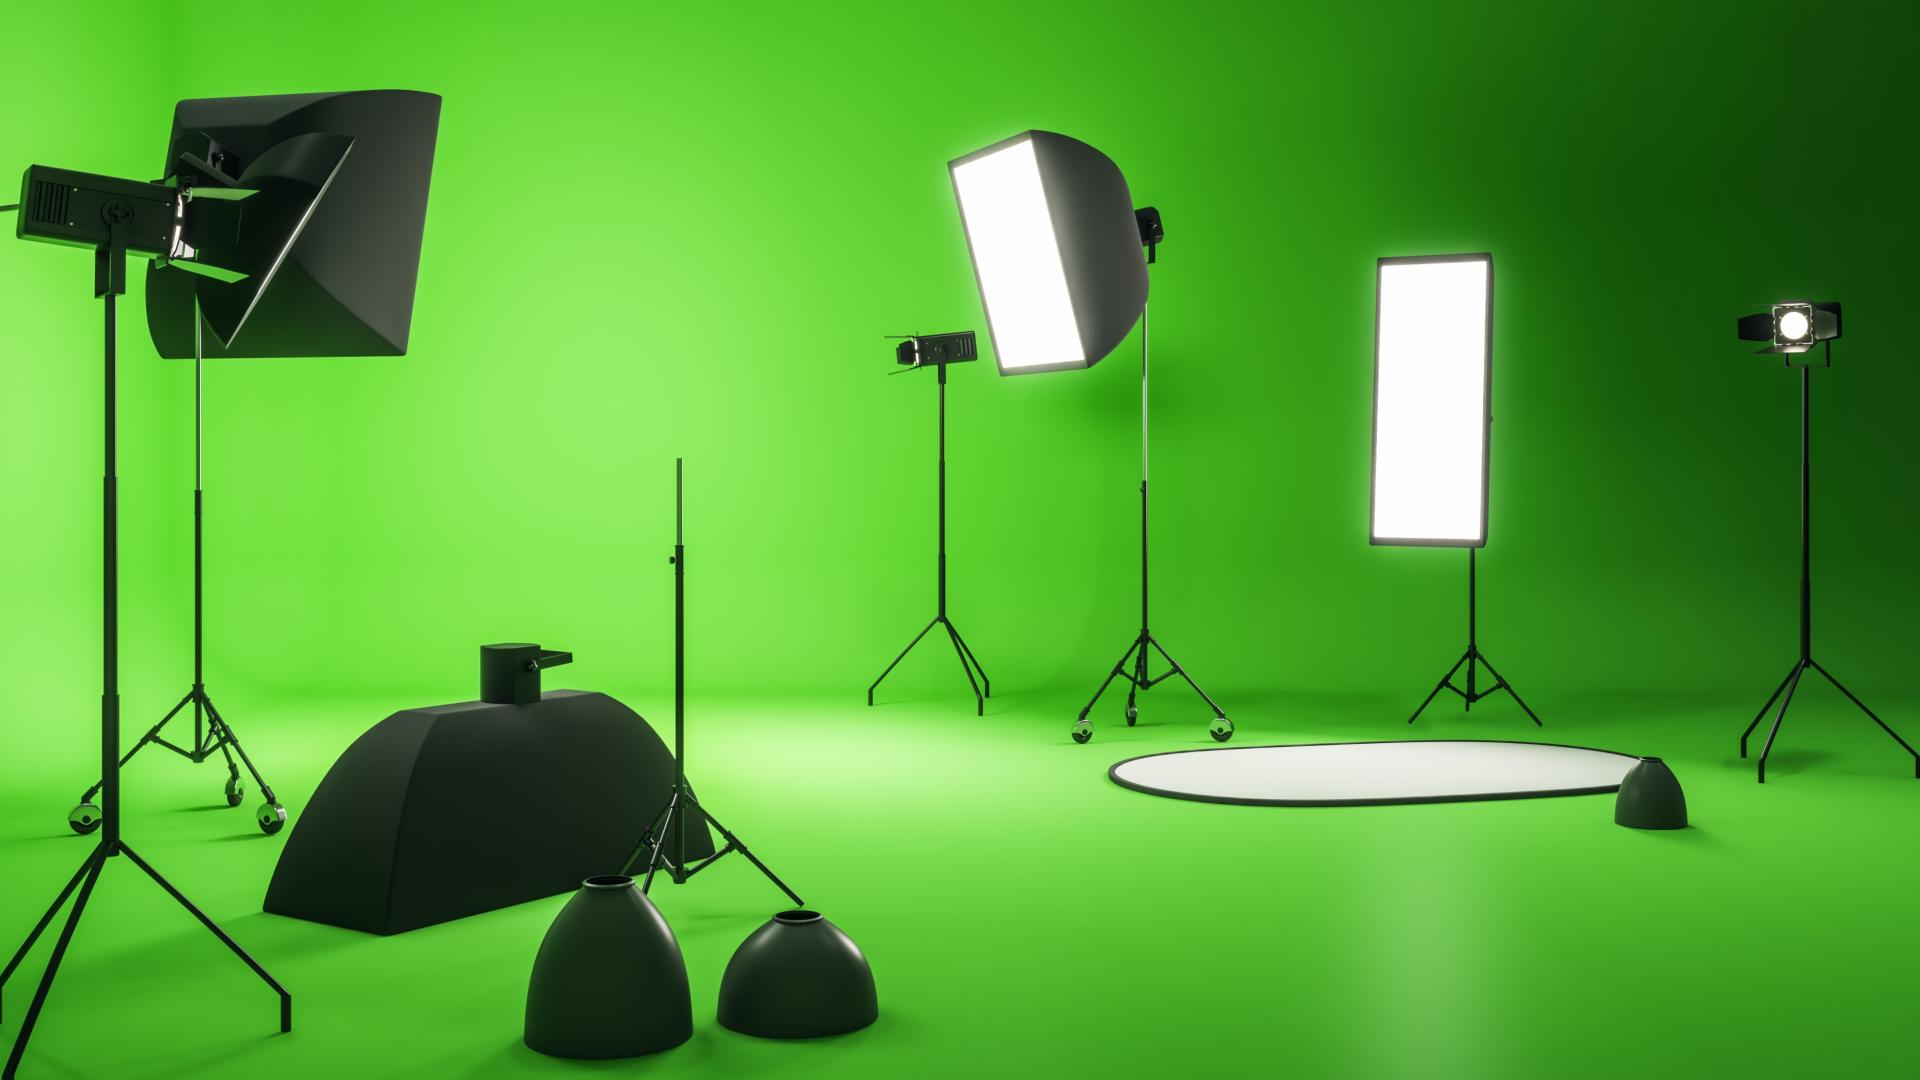 Green Screen Studios for Hire in Manchester